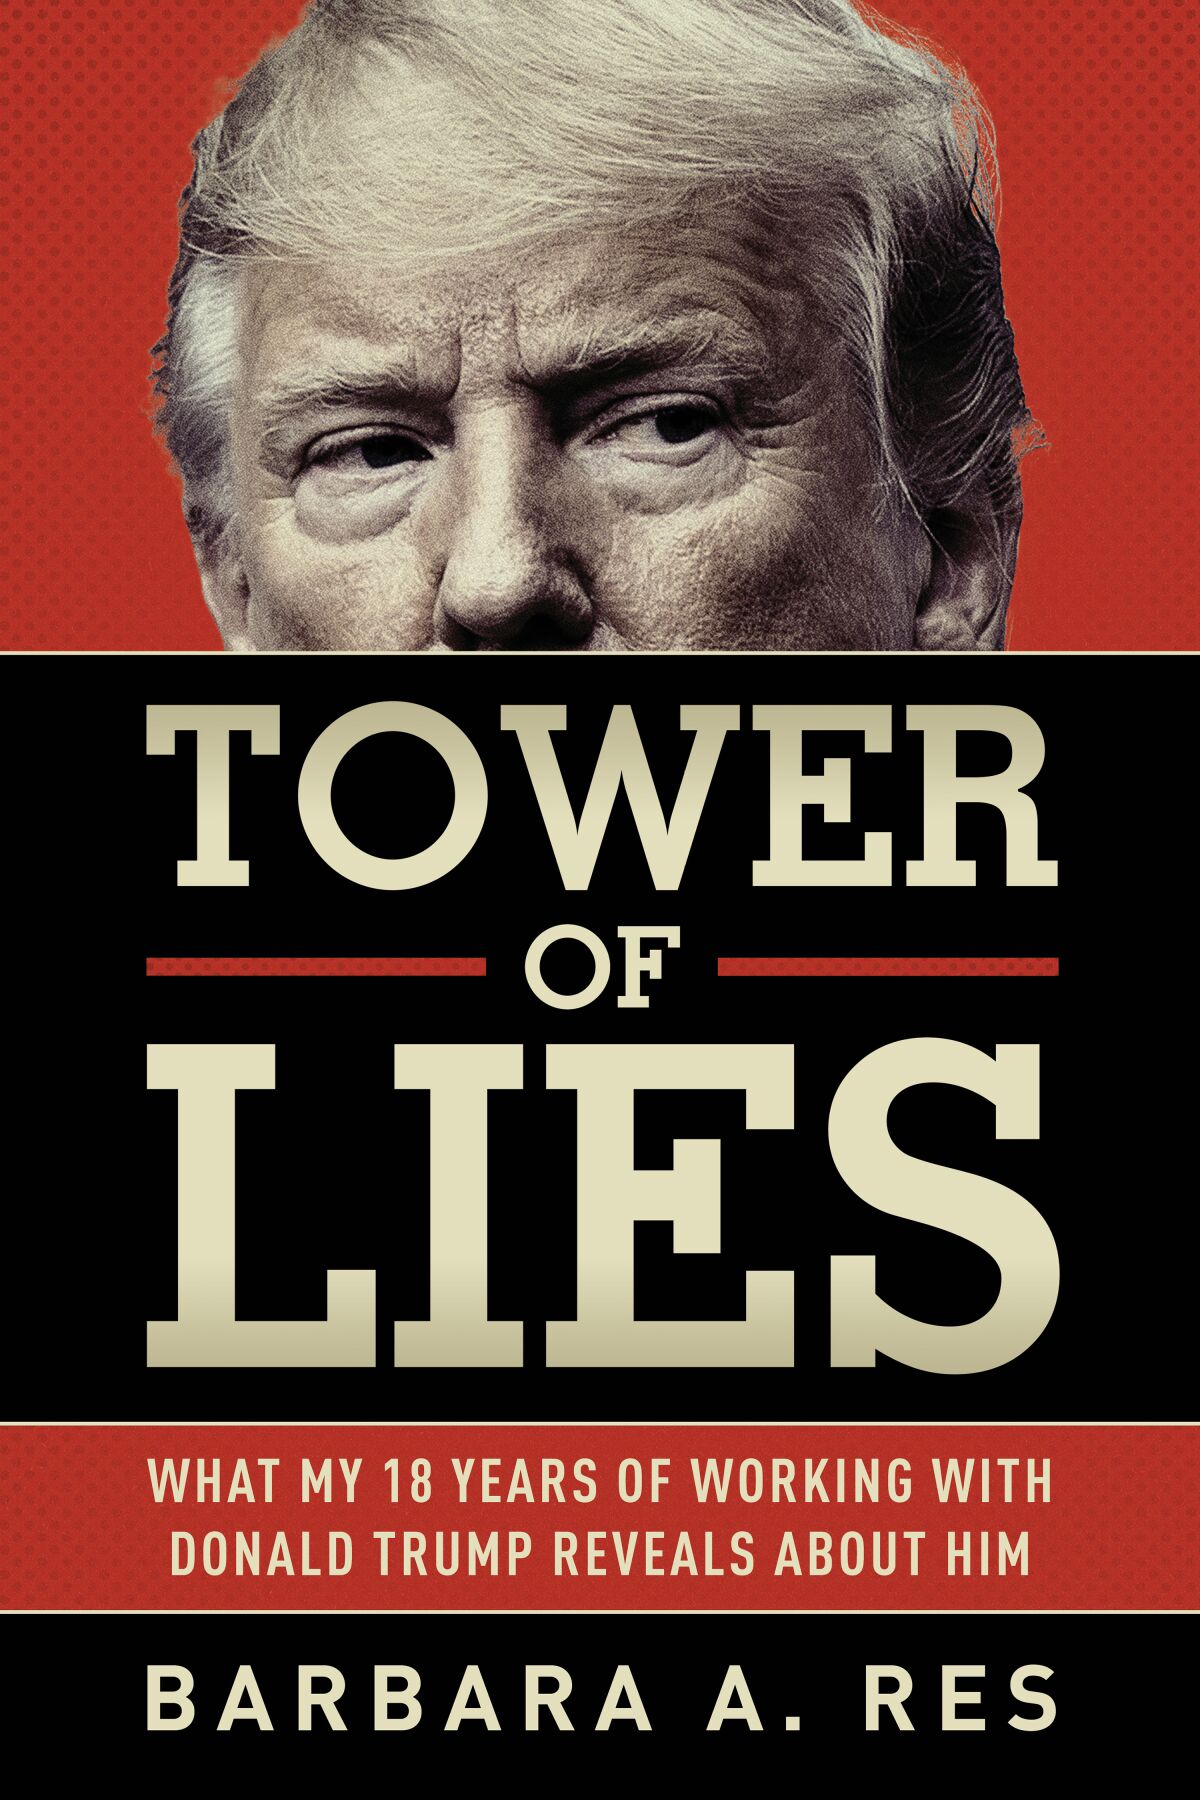 A book jacket with Trump's face reads Tower of Lies: What my 18 years of working with Donald Trump reveals about him